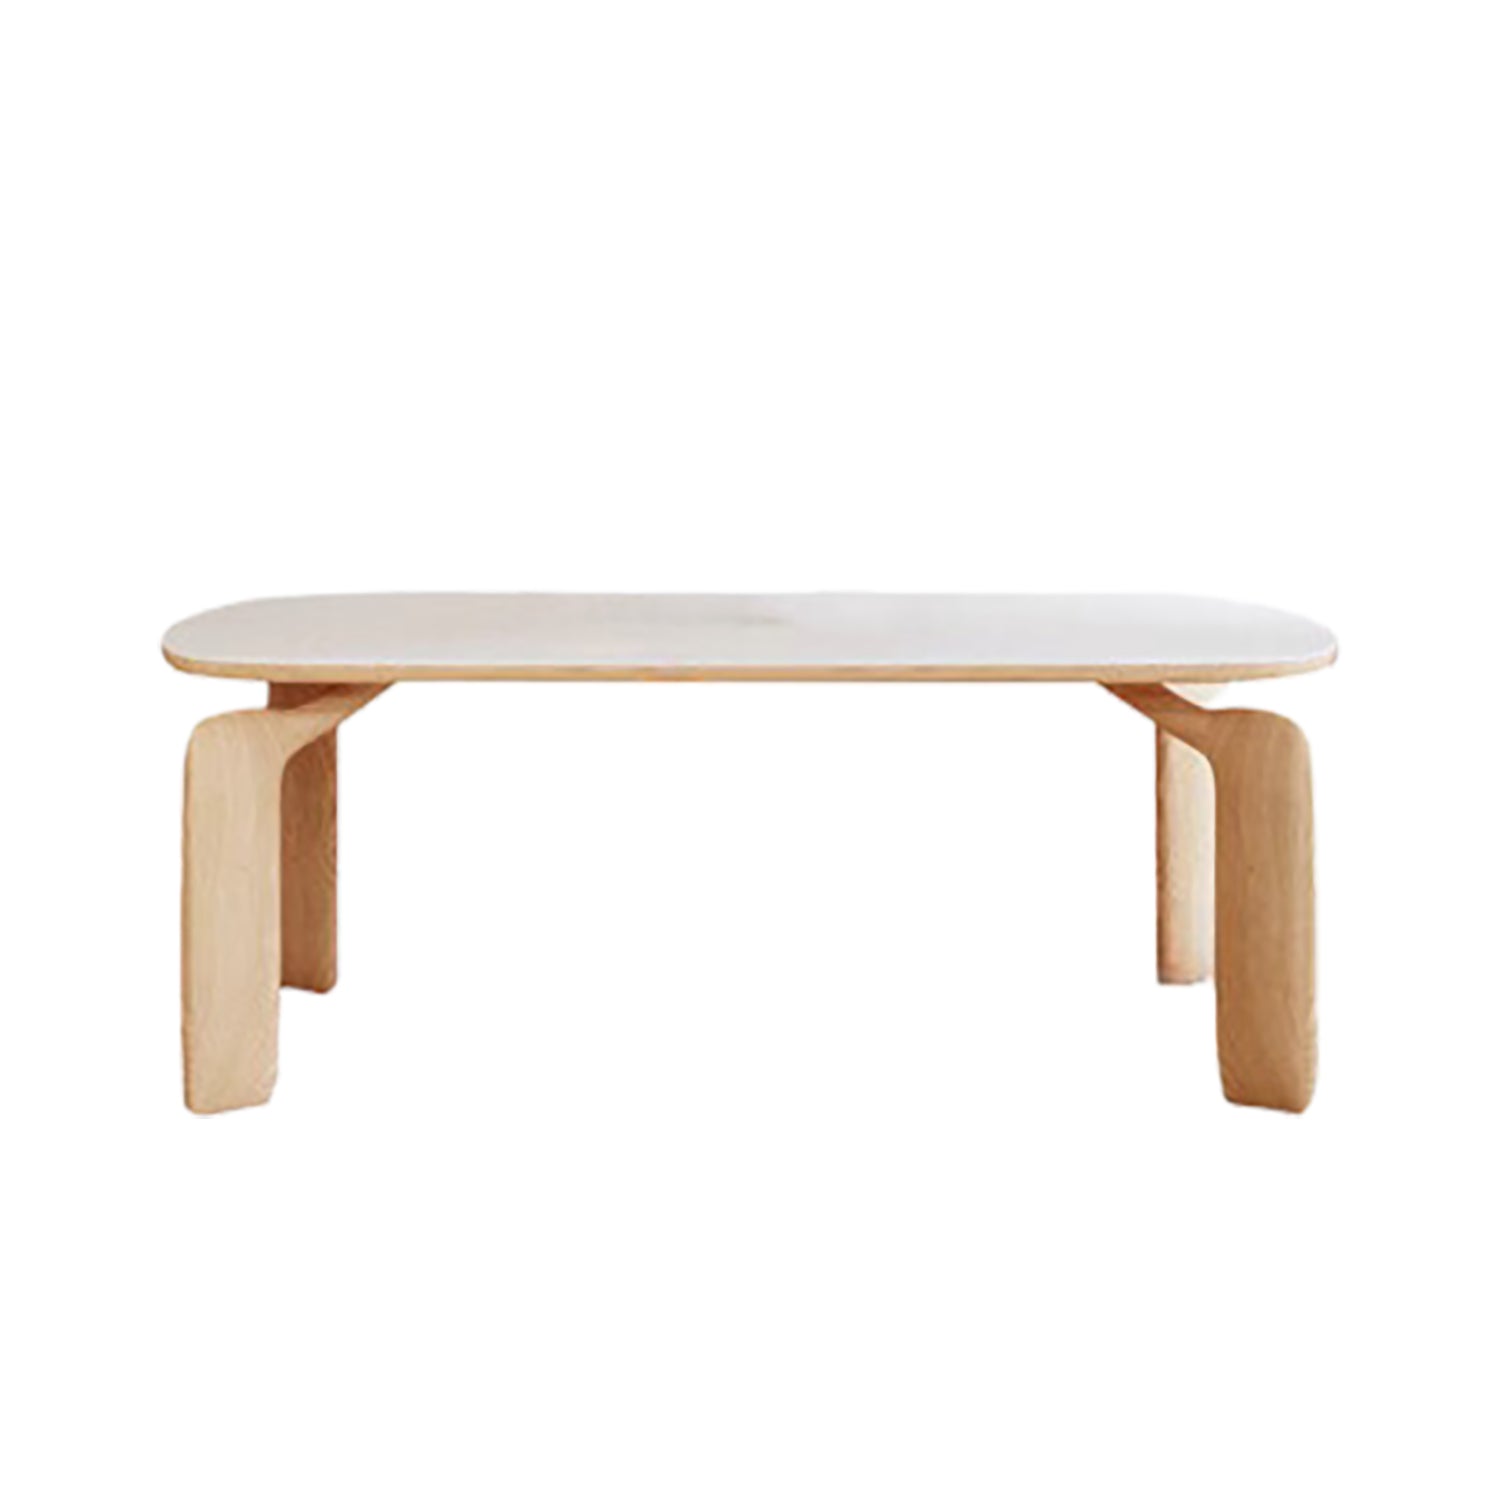 Everly Dining Table